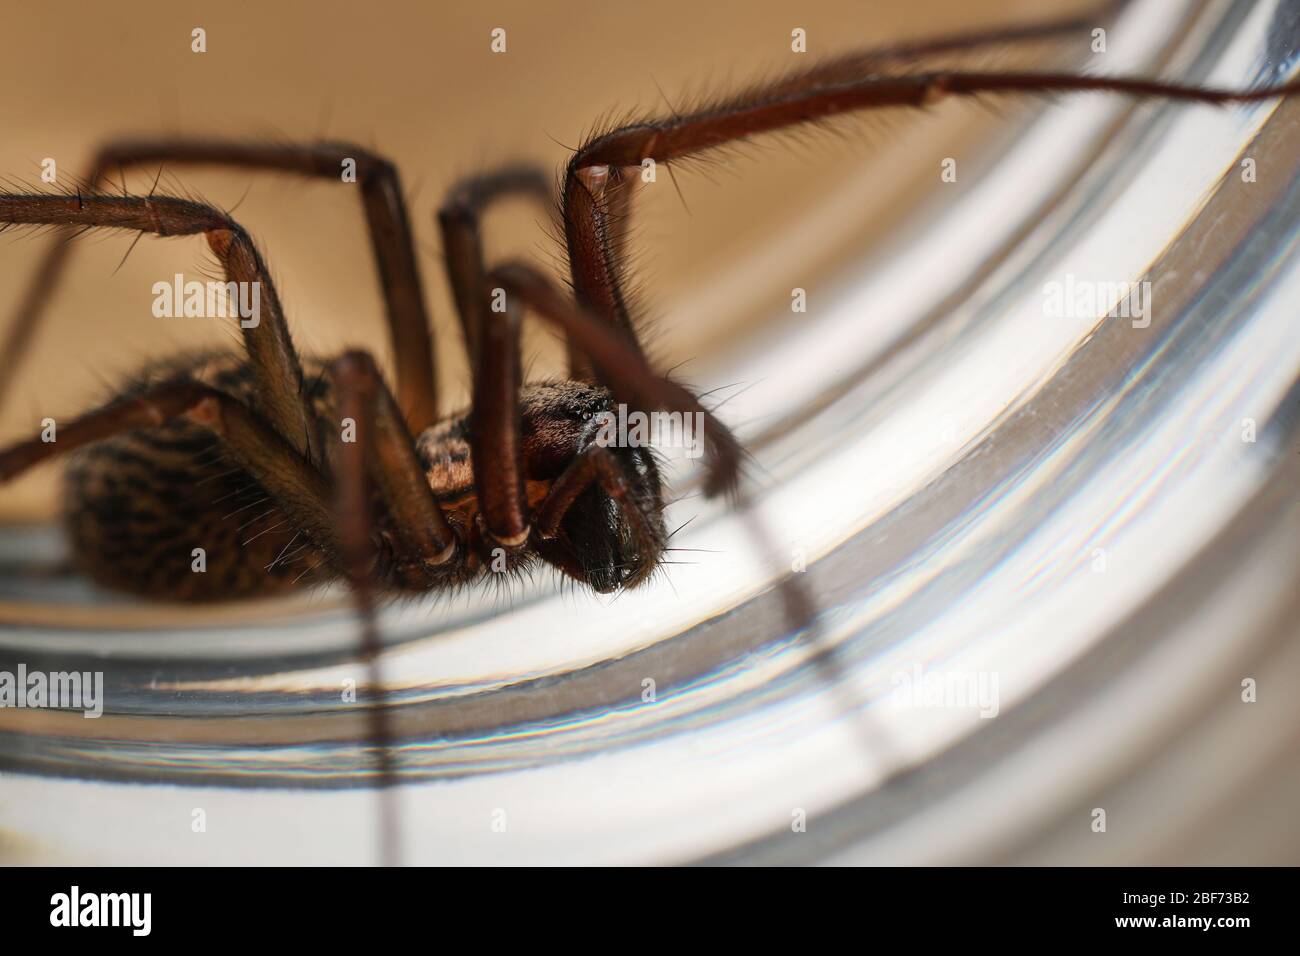 Giant House Spider (Tegenaria Duellica also know as Tegenaria Gigantea) trapped in a glass before being released outside Stock Photo